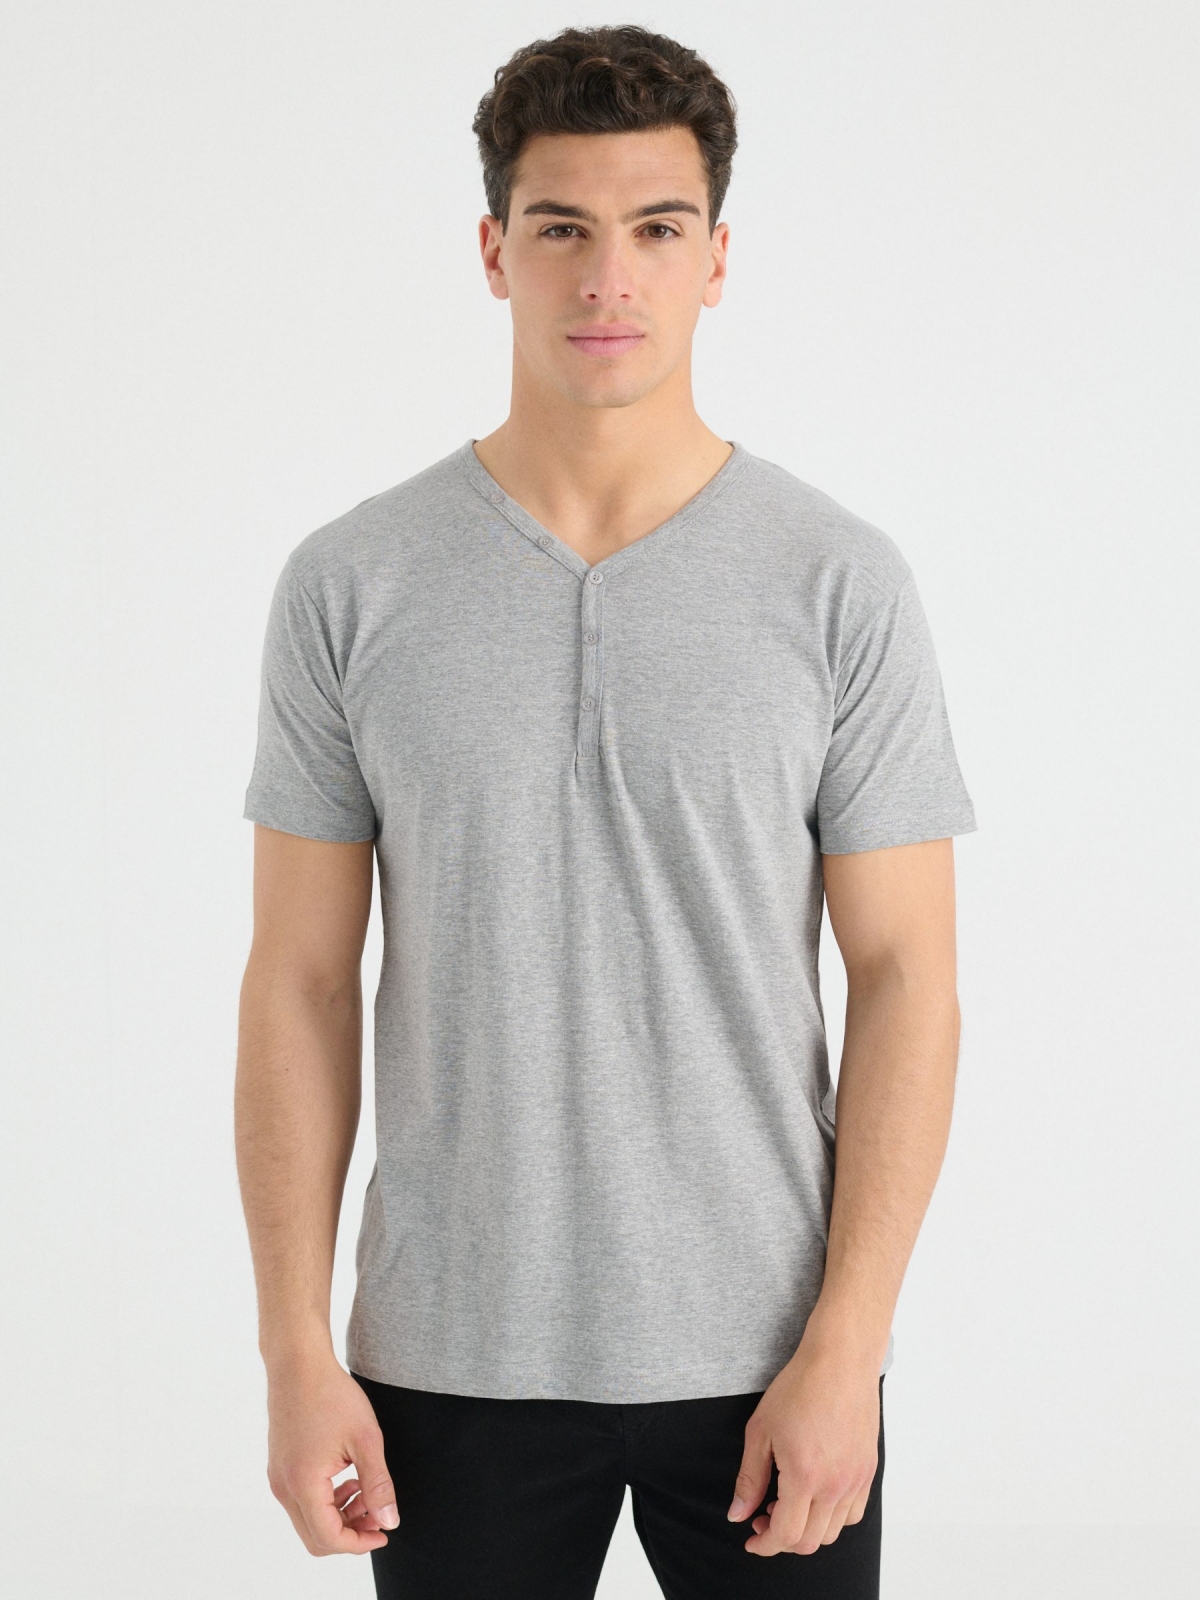 Buttons neck t-shirt grey middle front view